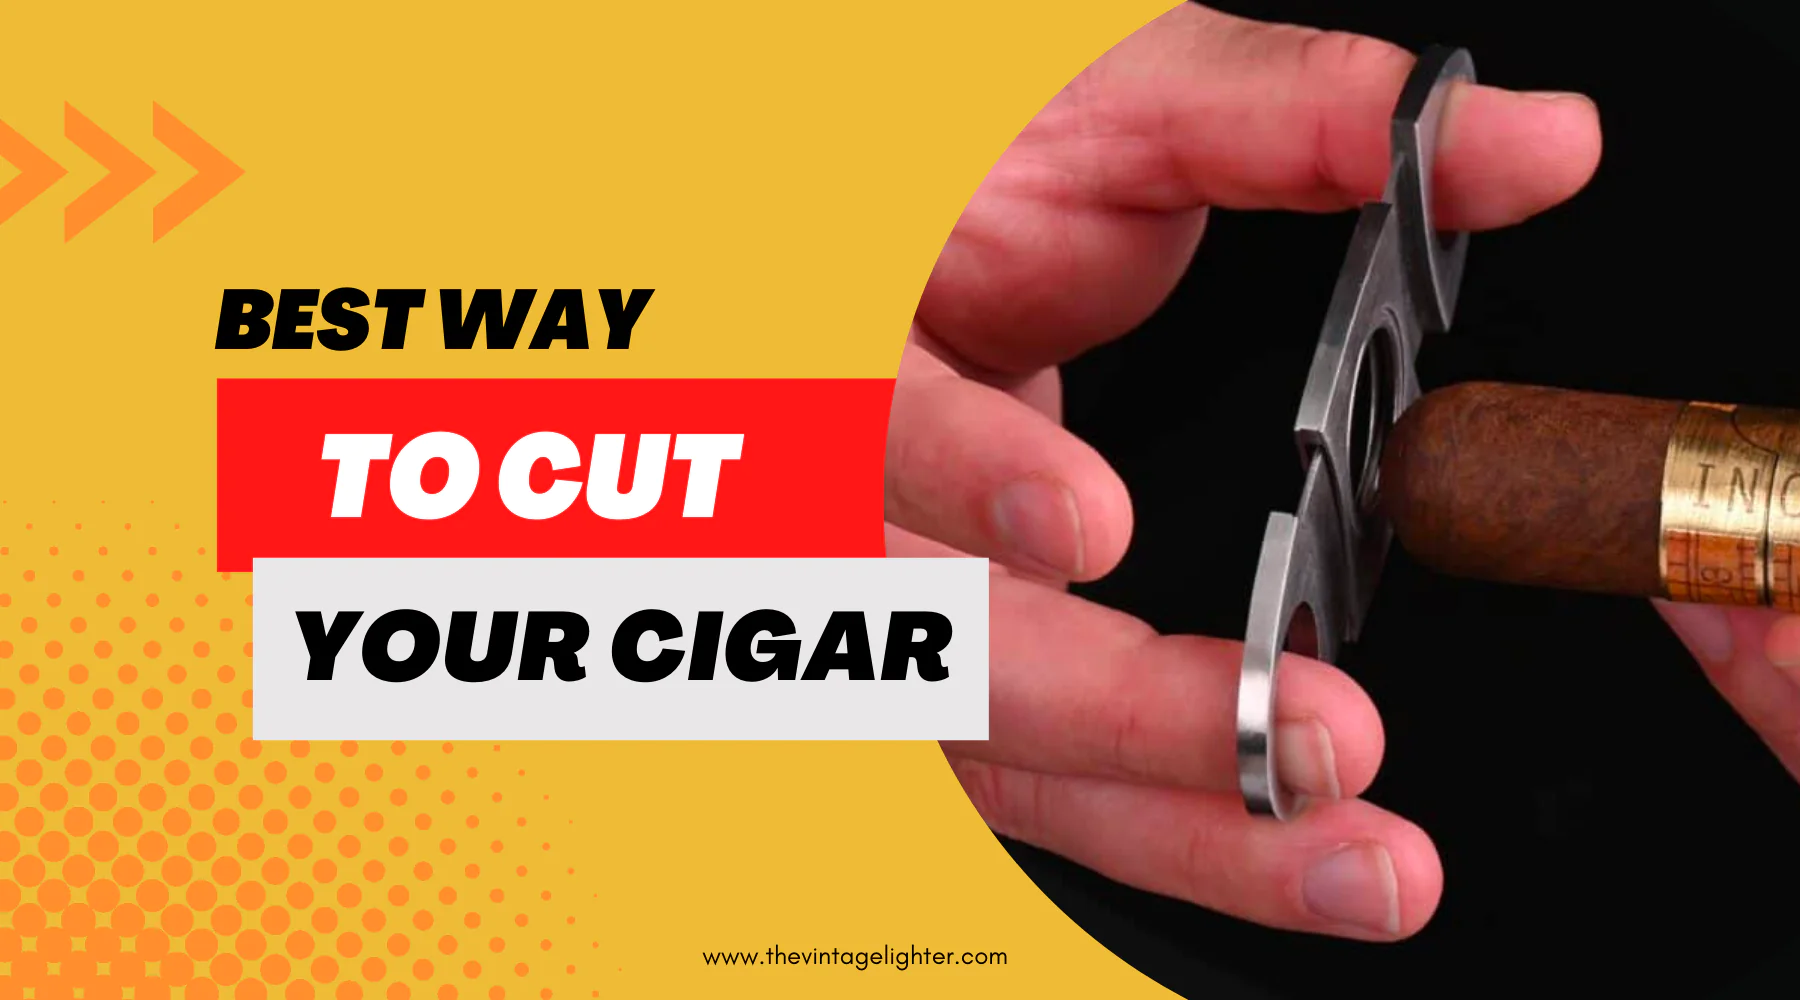 Best way to cut the cigar - How to cut the Cigar